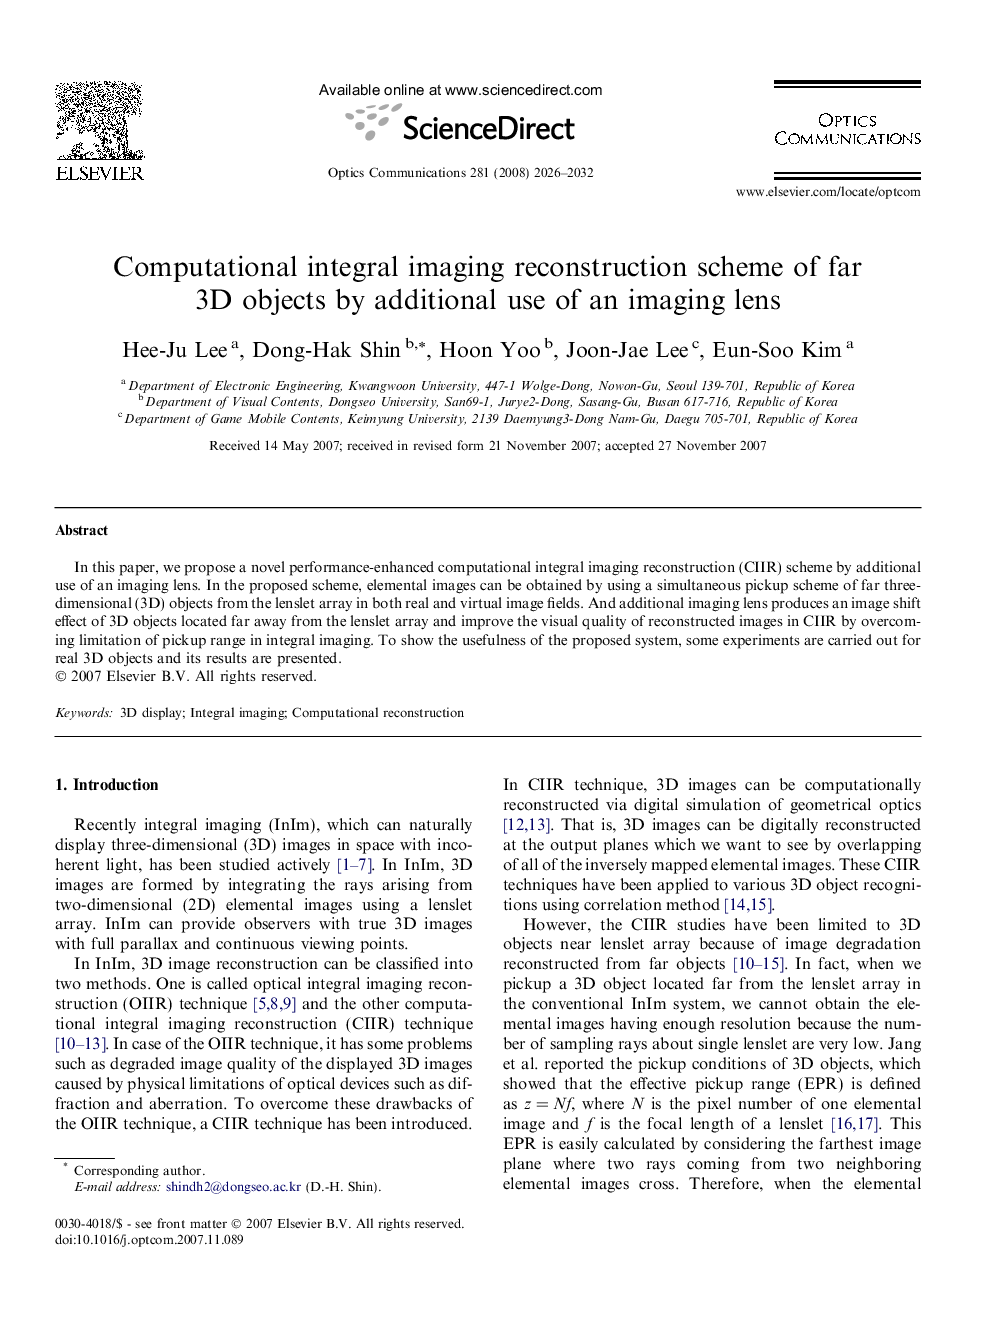 Computational integral imaging reconstruction scheme of far 3D objects by additional use of an imaging lens